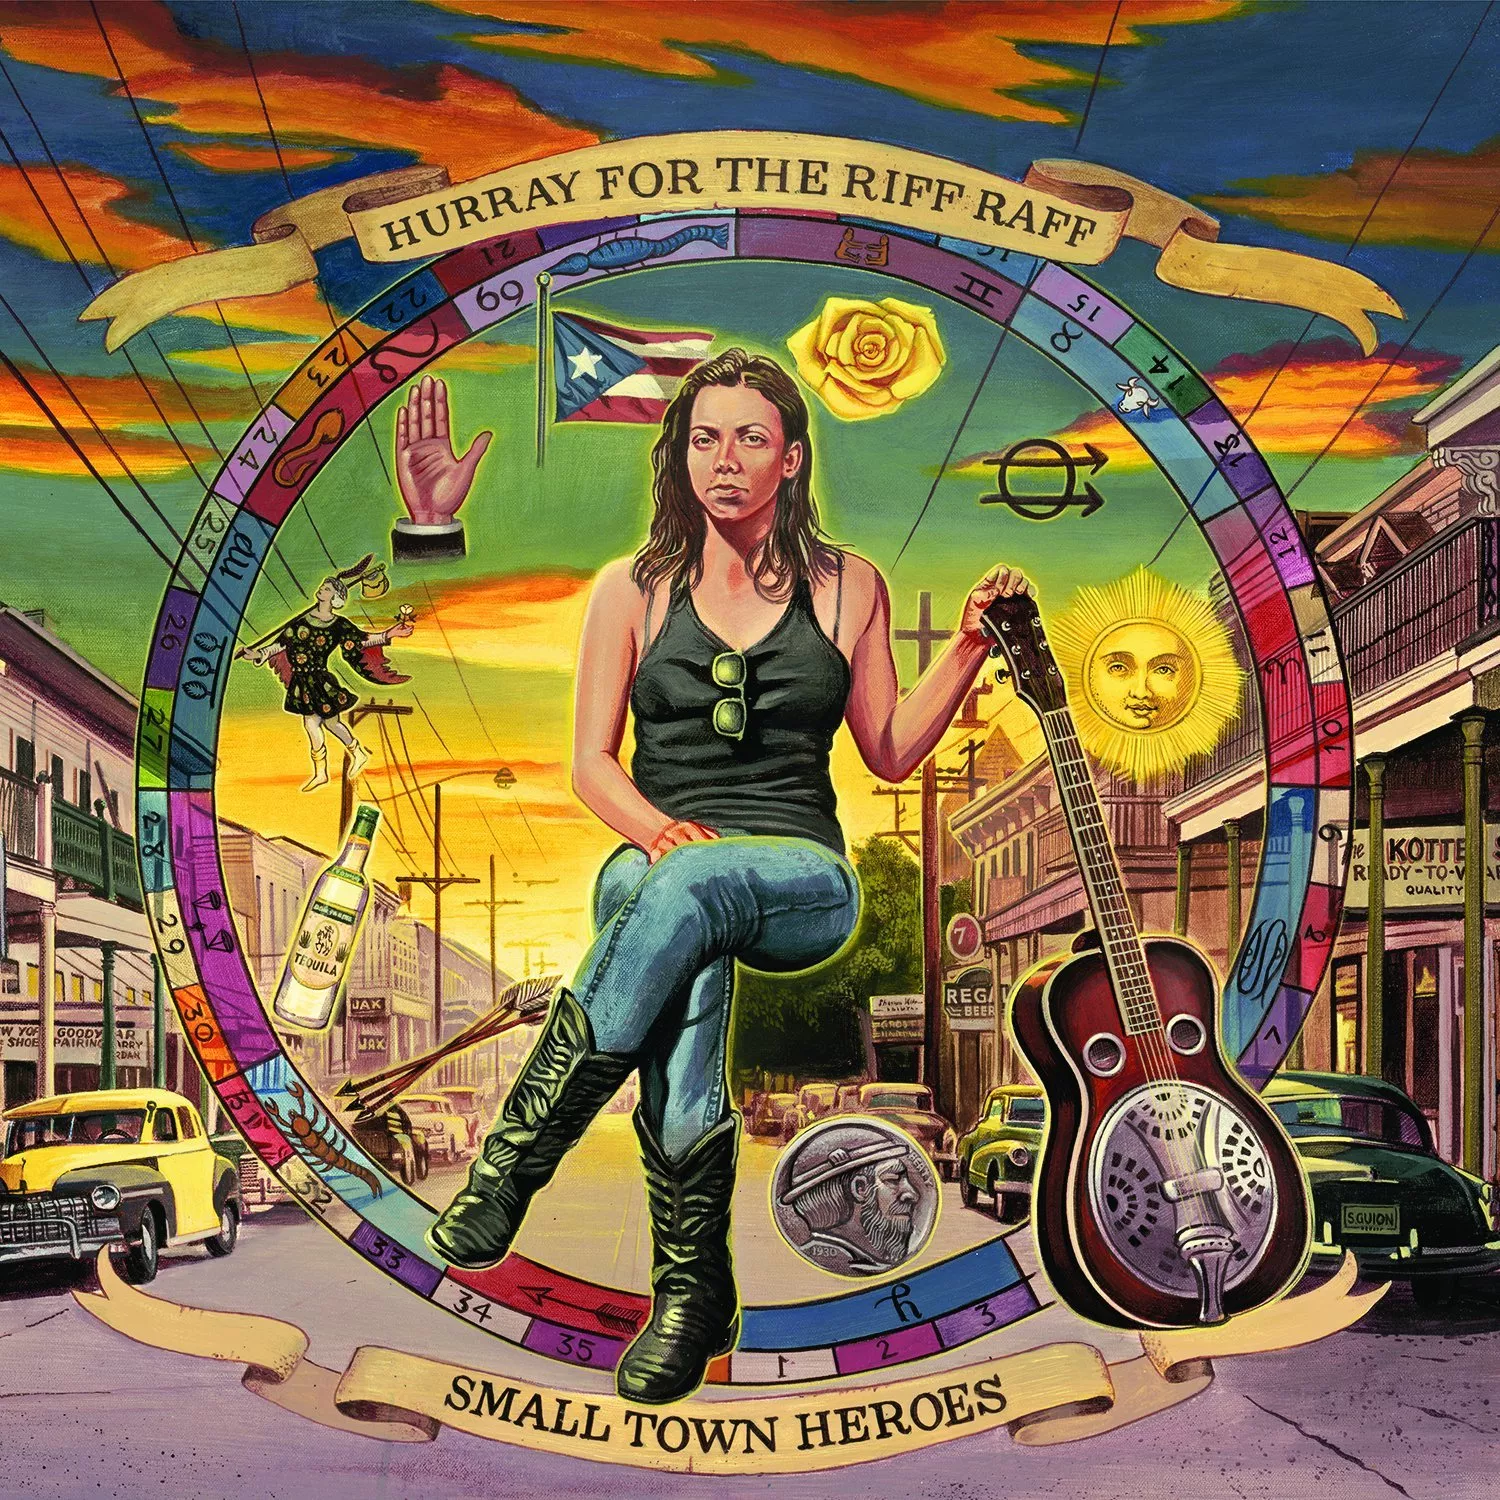 Small Town Heroes - Hurray for the Riff Raff